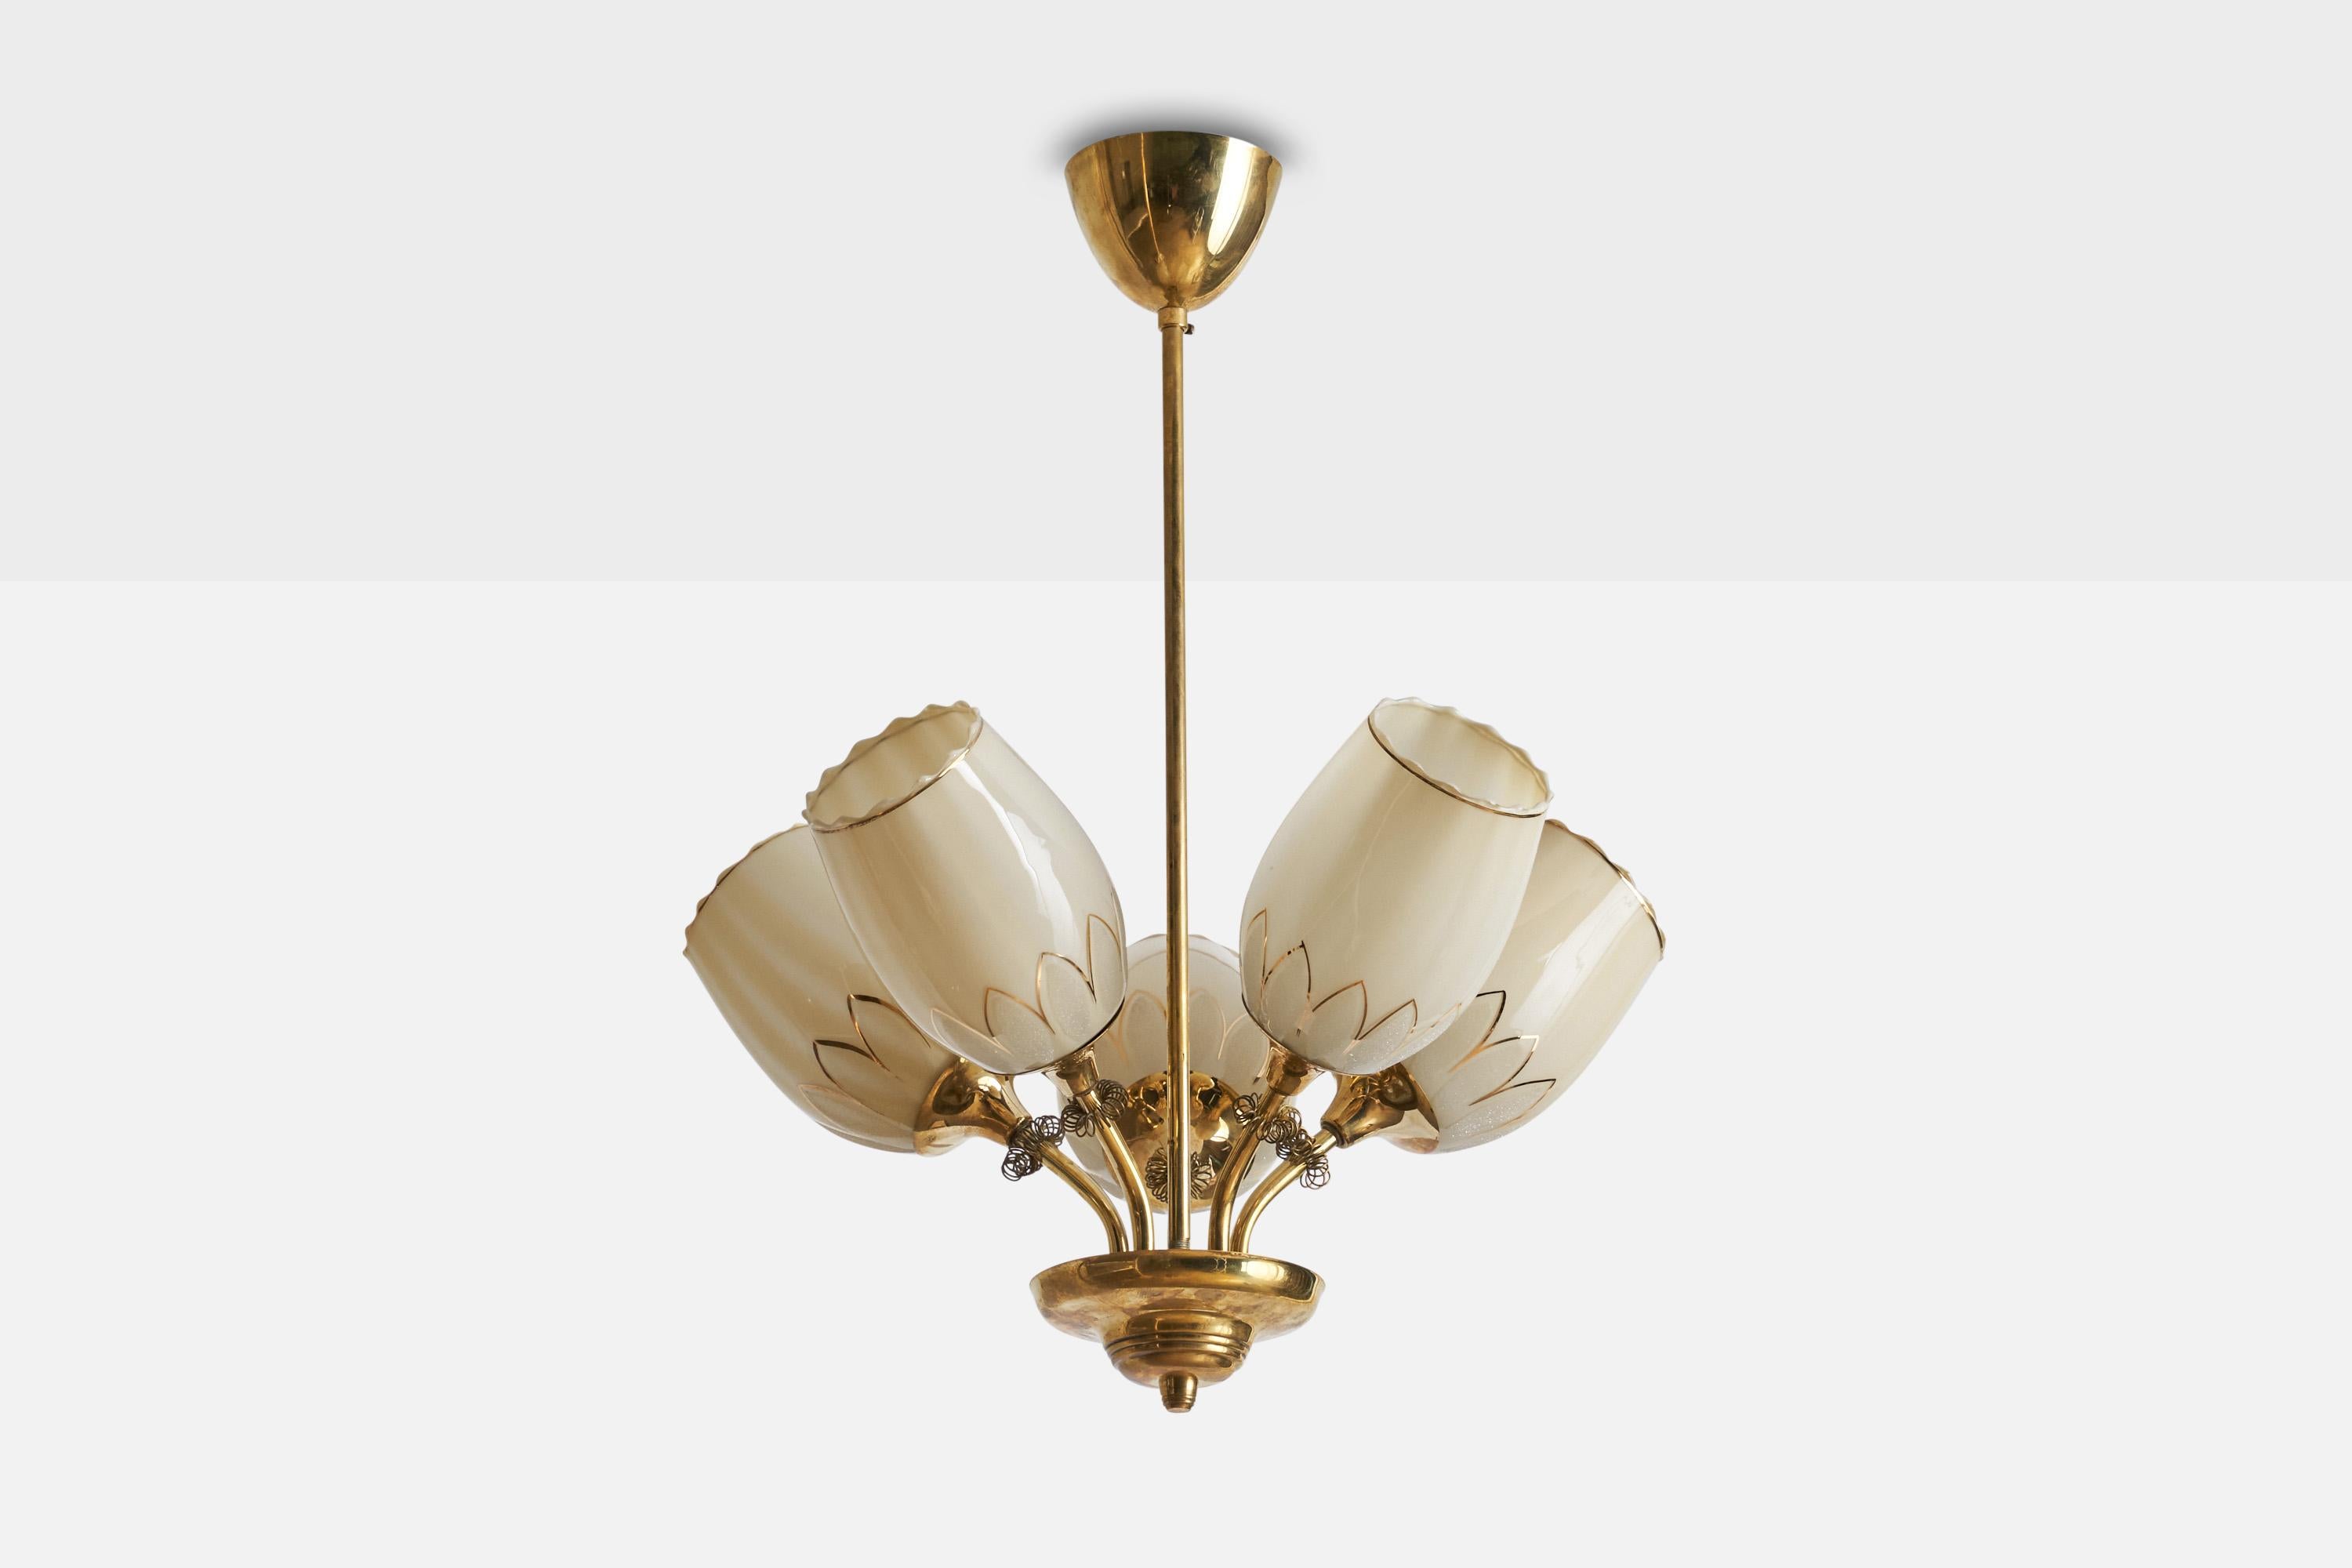 A brass and gilded opaline glass chandelier designed and produced in Finland, 1940s.

Dimensions of canopy (inches): 3” H x 4” Diameter
Socket takes standard E-26 bulbs. 4 sockets.There is no maximum wattage stated on the fixture. All lighting will